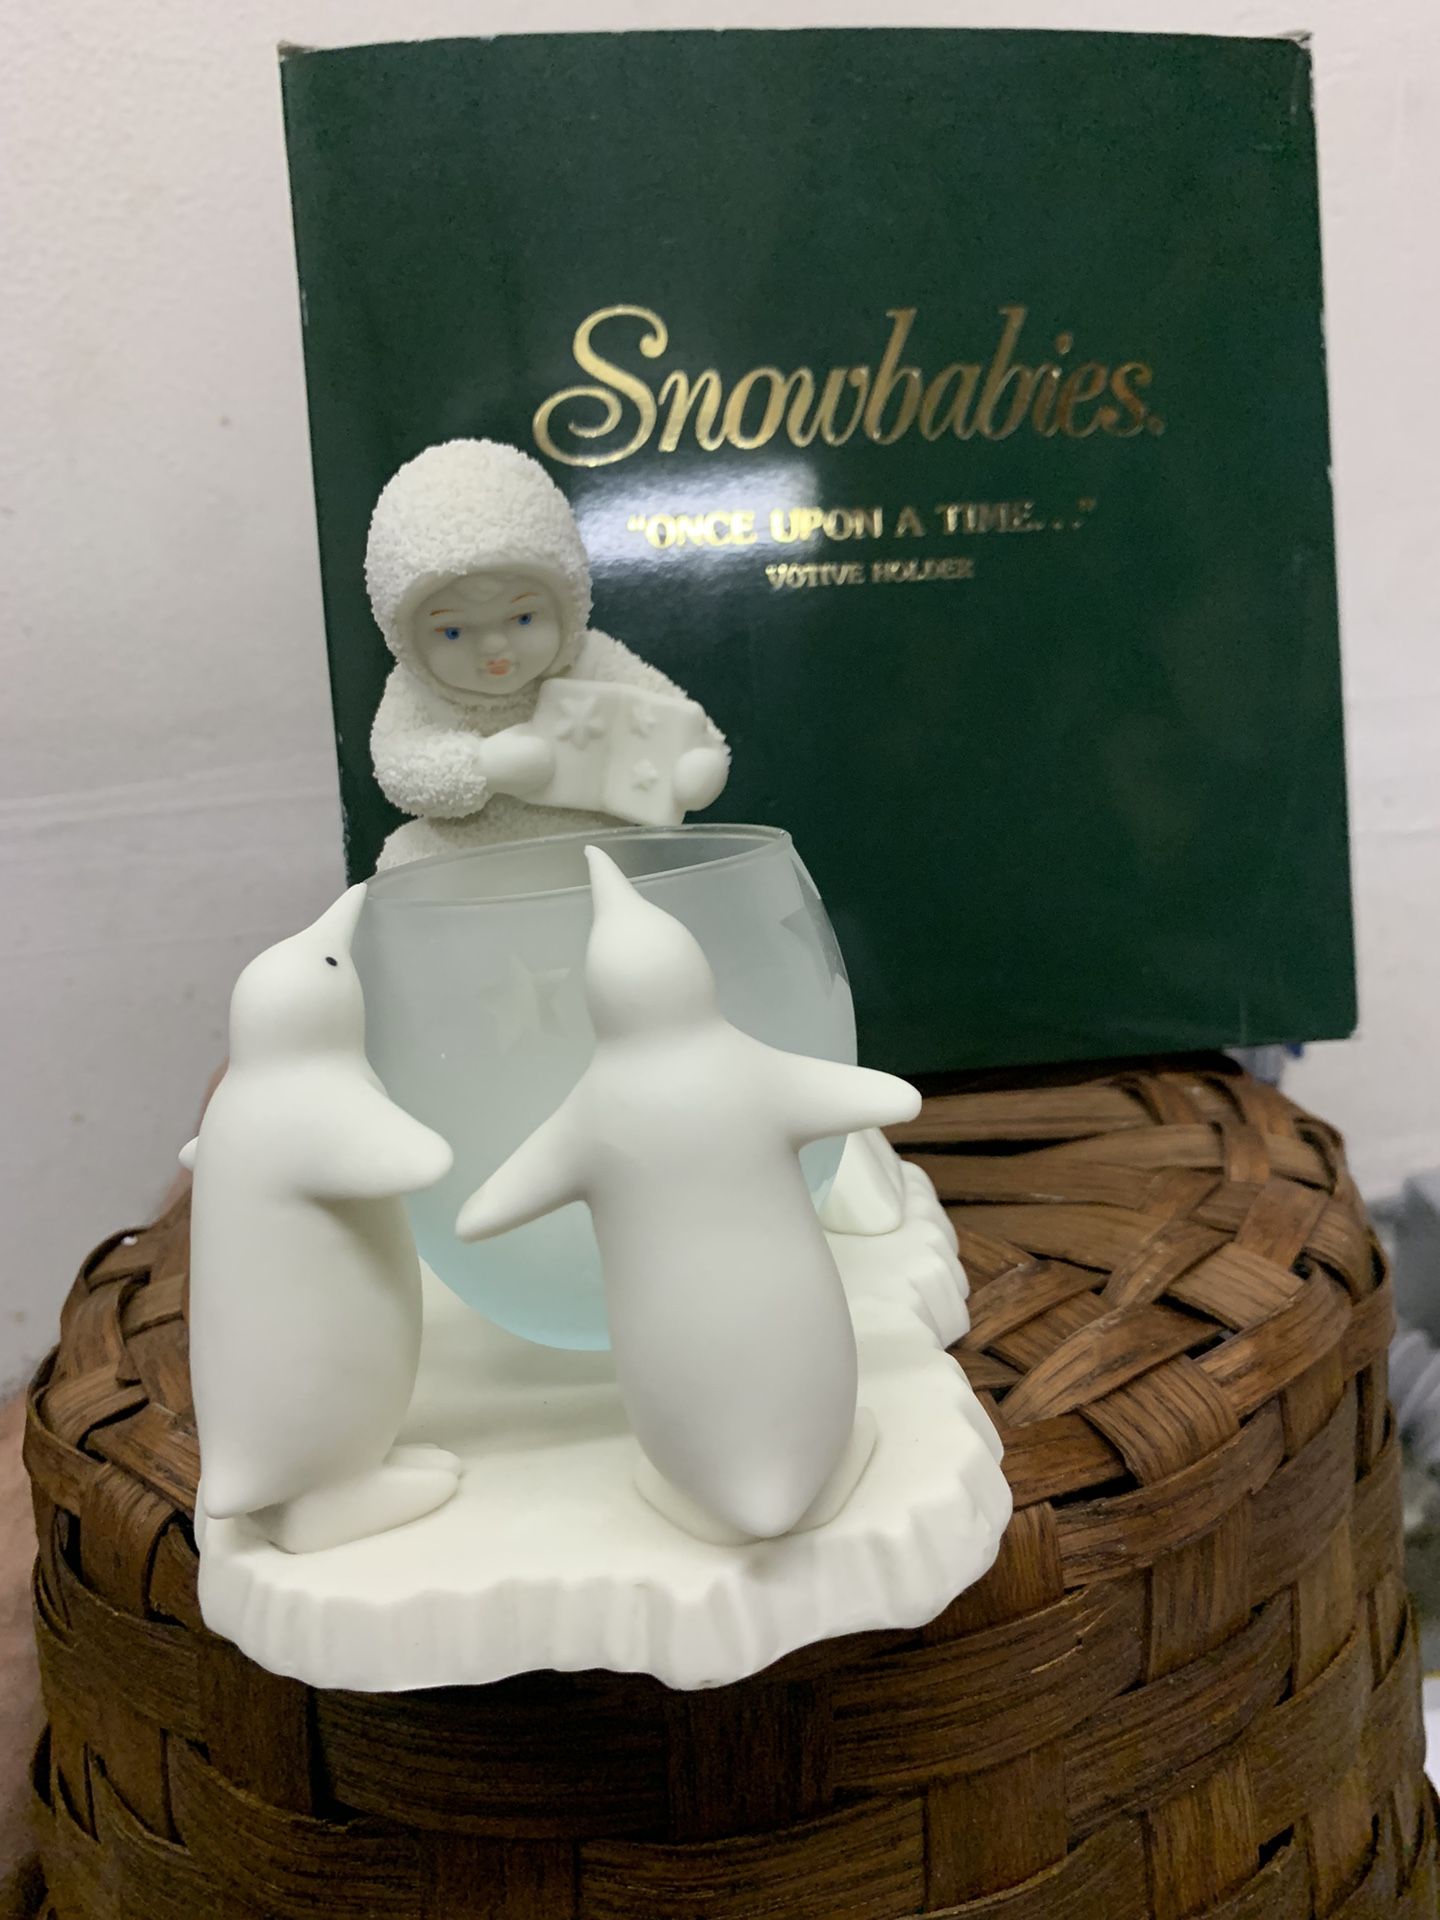 Snowbabies “Once Upon A Time” Votive Holder Nineteen Ninety Six To Two Thousand